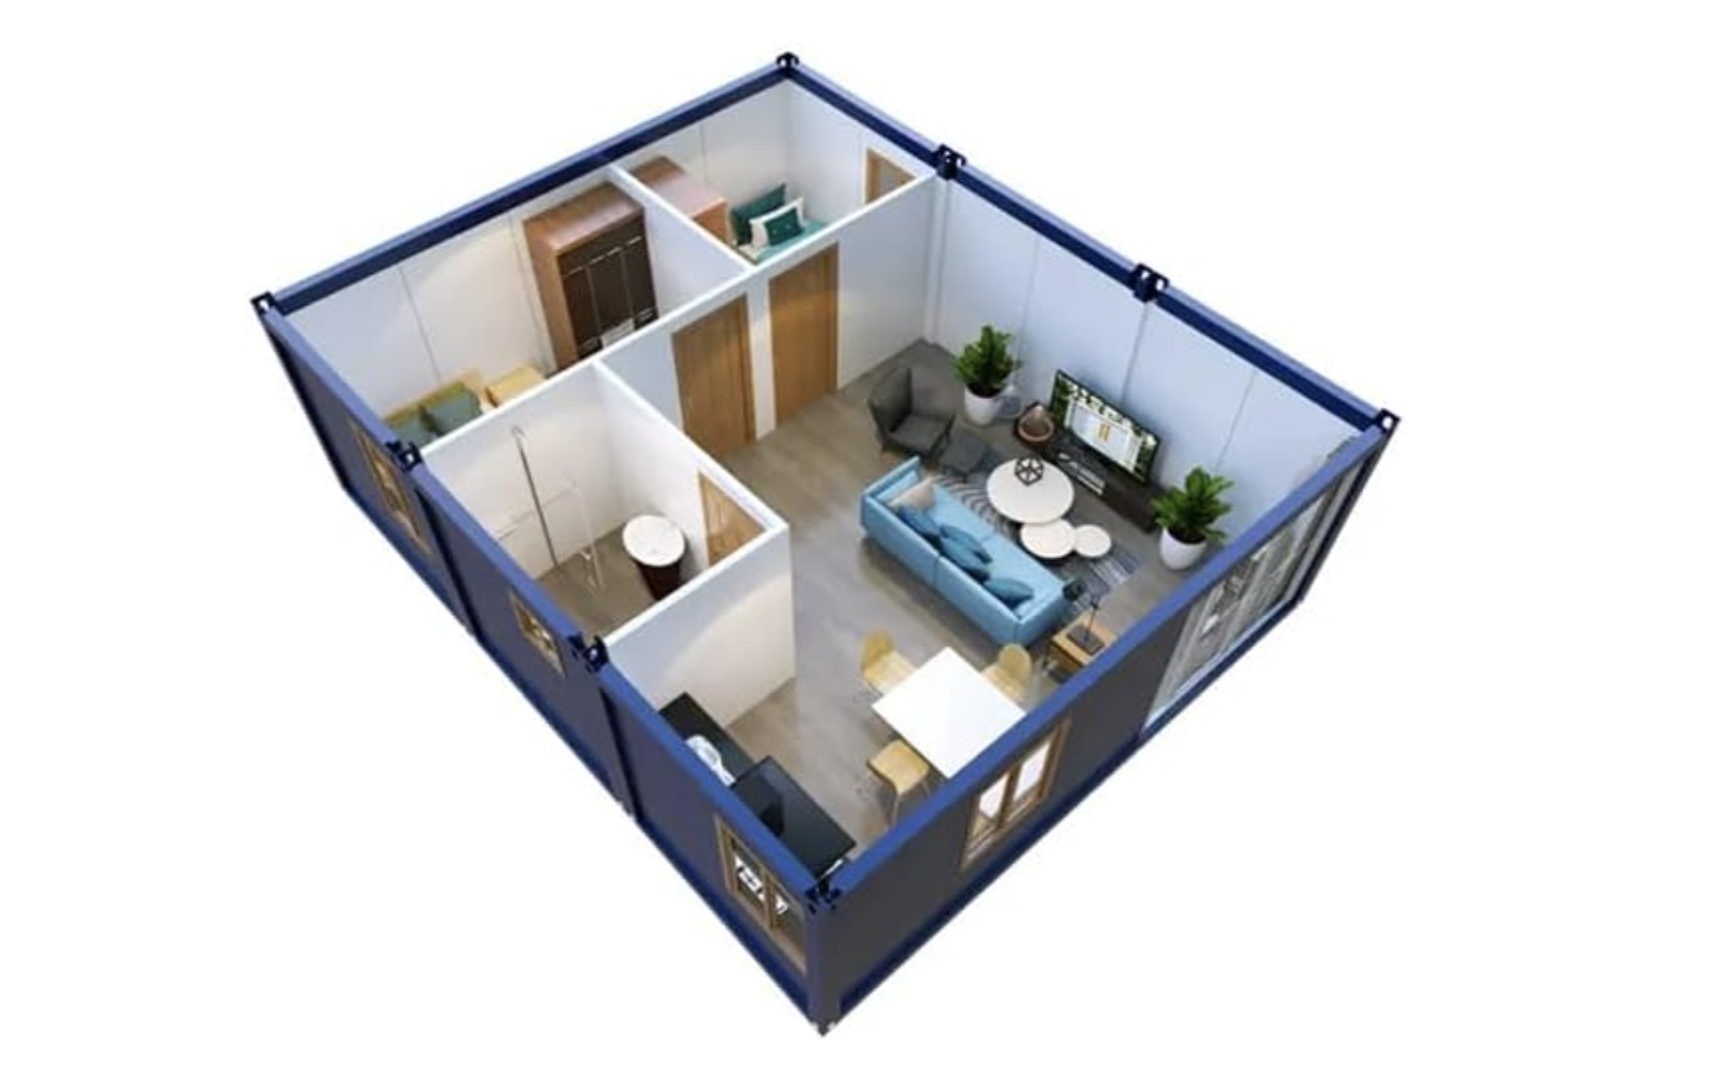 A modern, compact studio apartment layout with designated areas for living, kitchen, bed, and bath